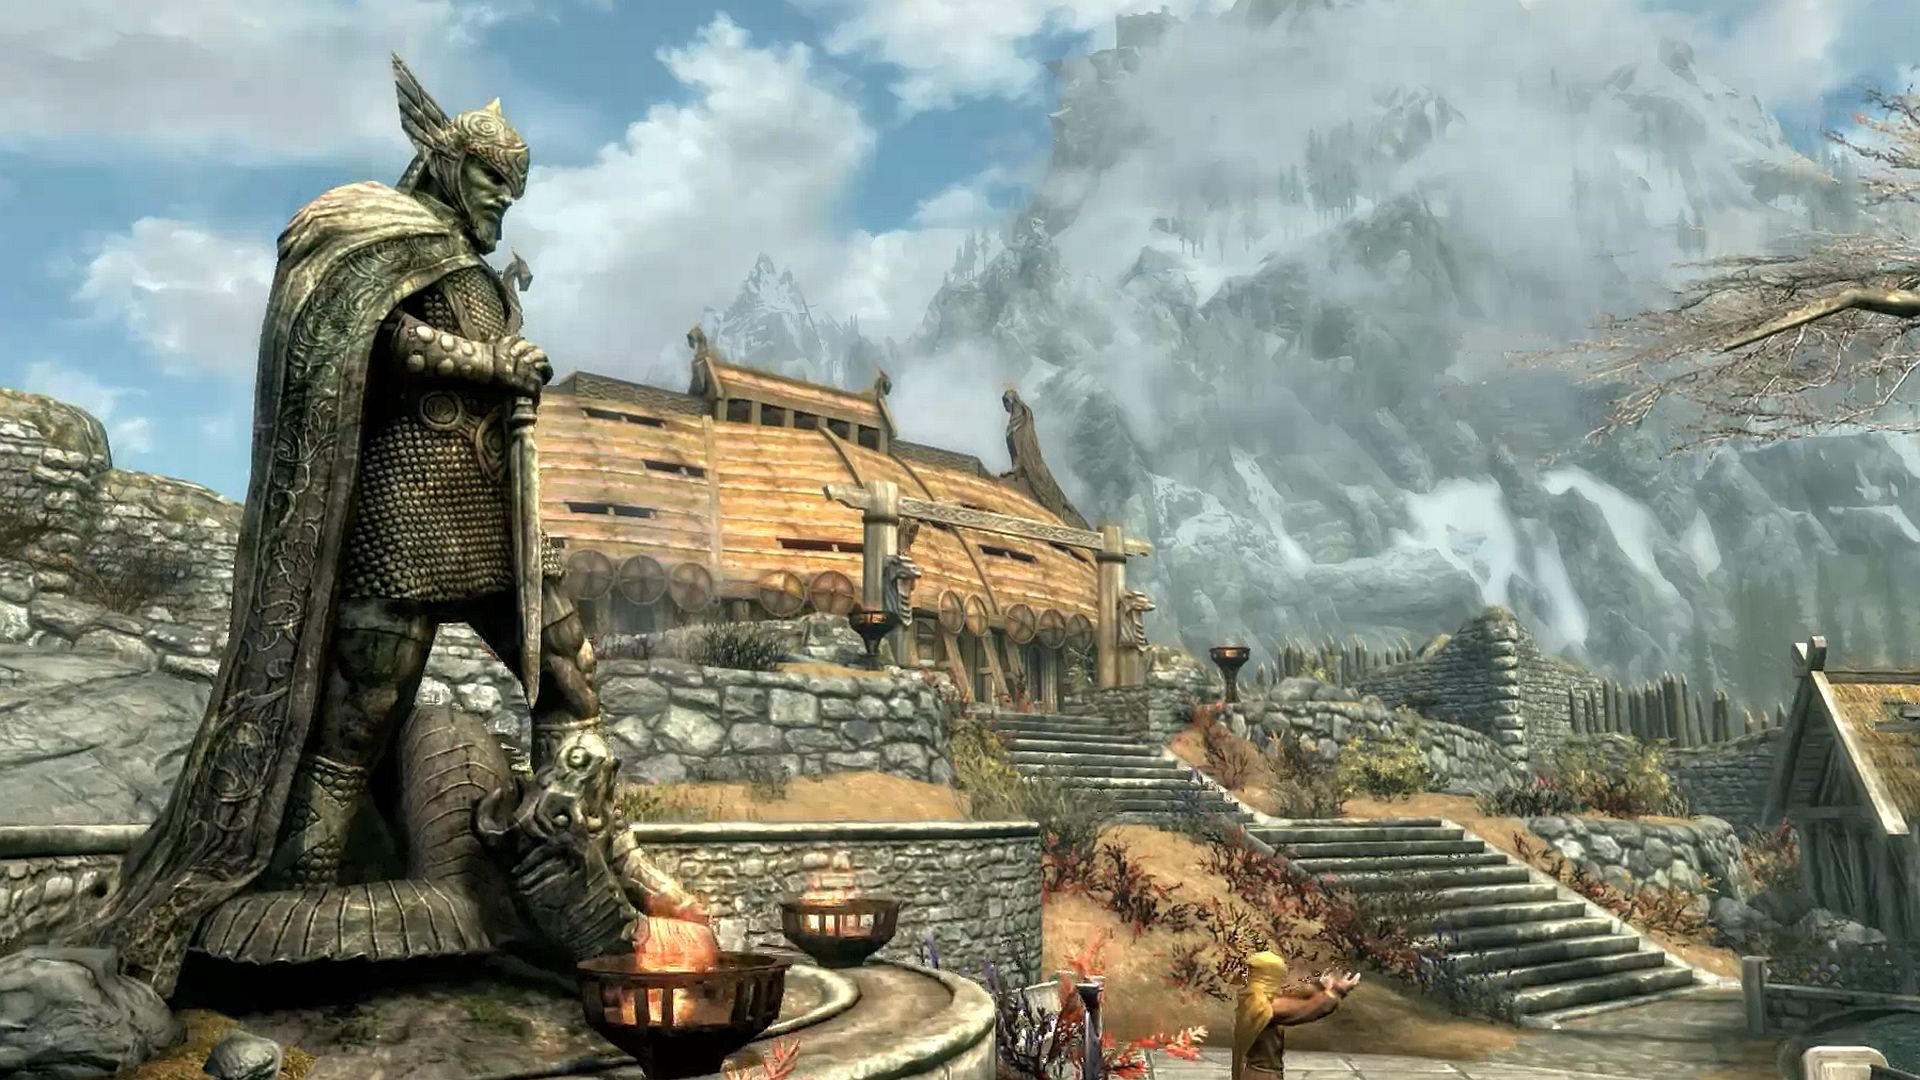 A Skyrim fan has recreated Whiterun in Minecraft and it’s spot on